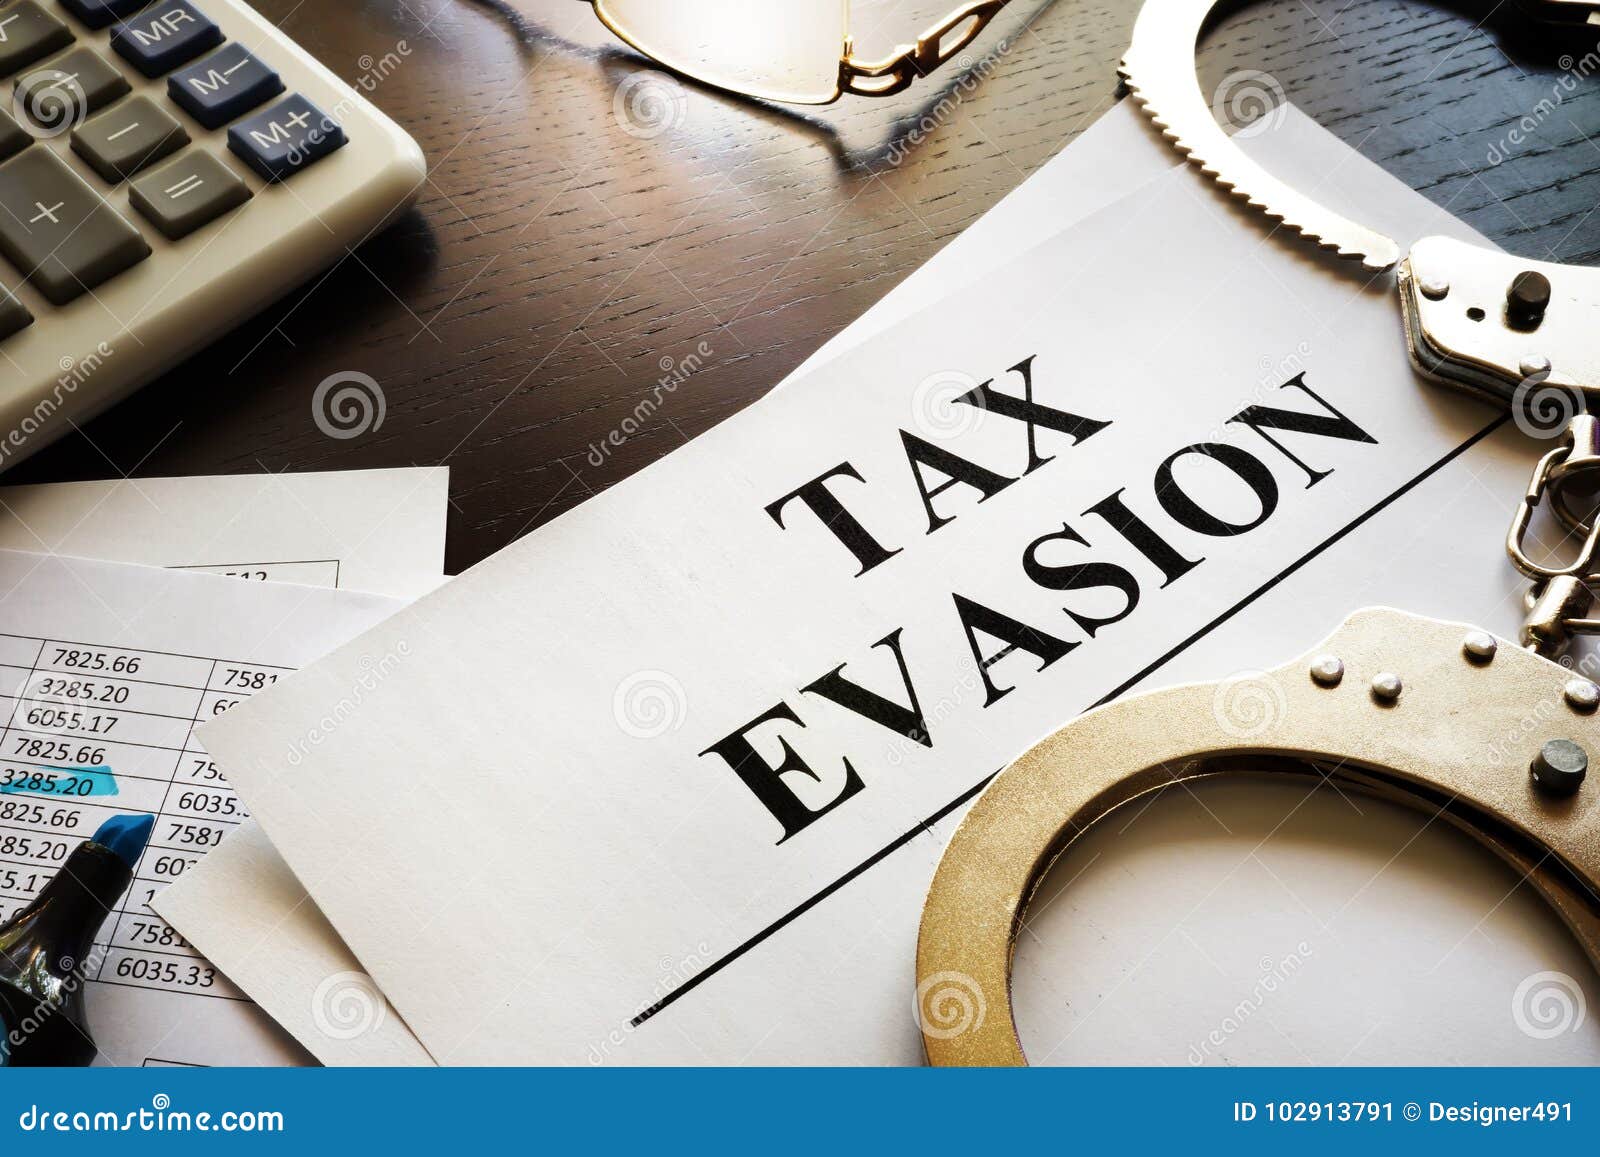 papers about tax evasion on a desk.